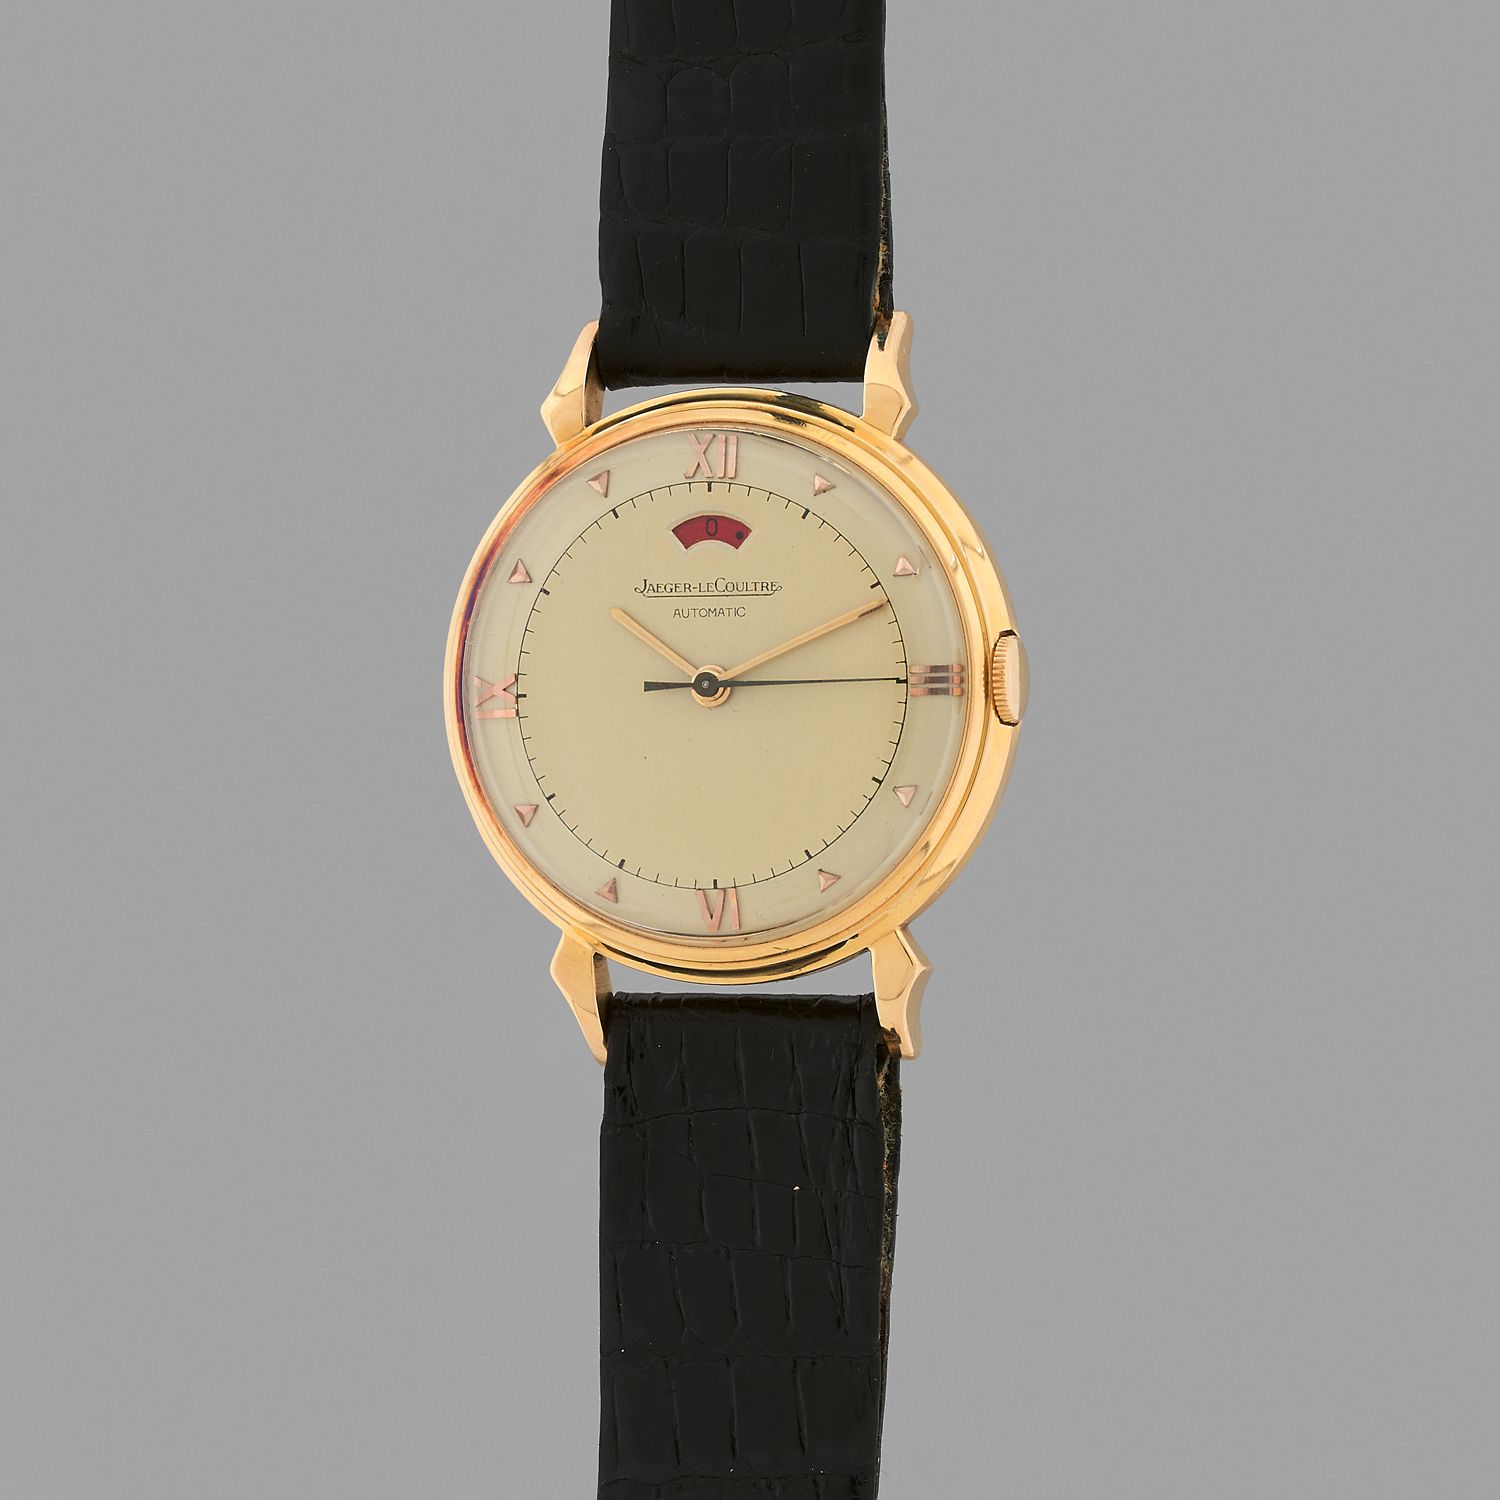 Null JAEGER LECOULTRE
Power reserve.
Circa: 1950.
Pink gold case 750/1000. Two-t&hellip;